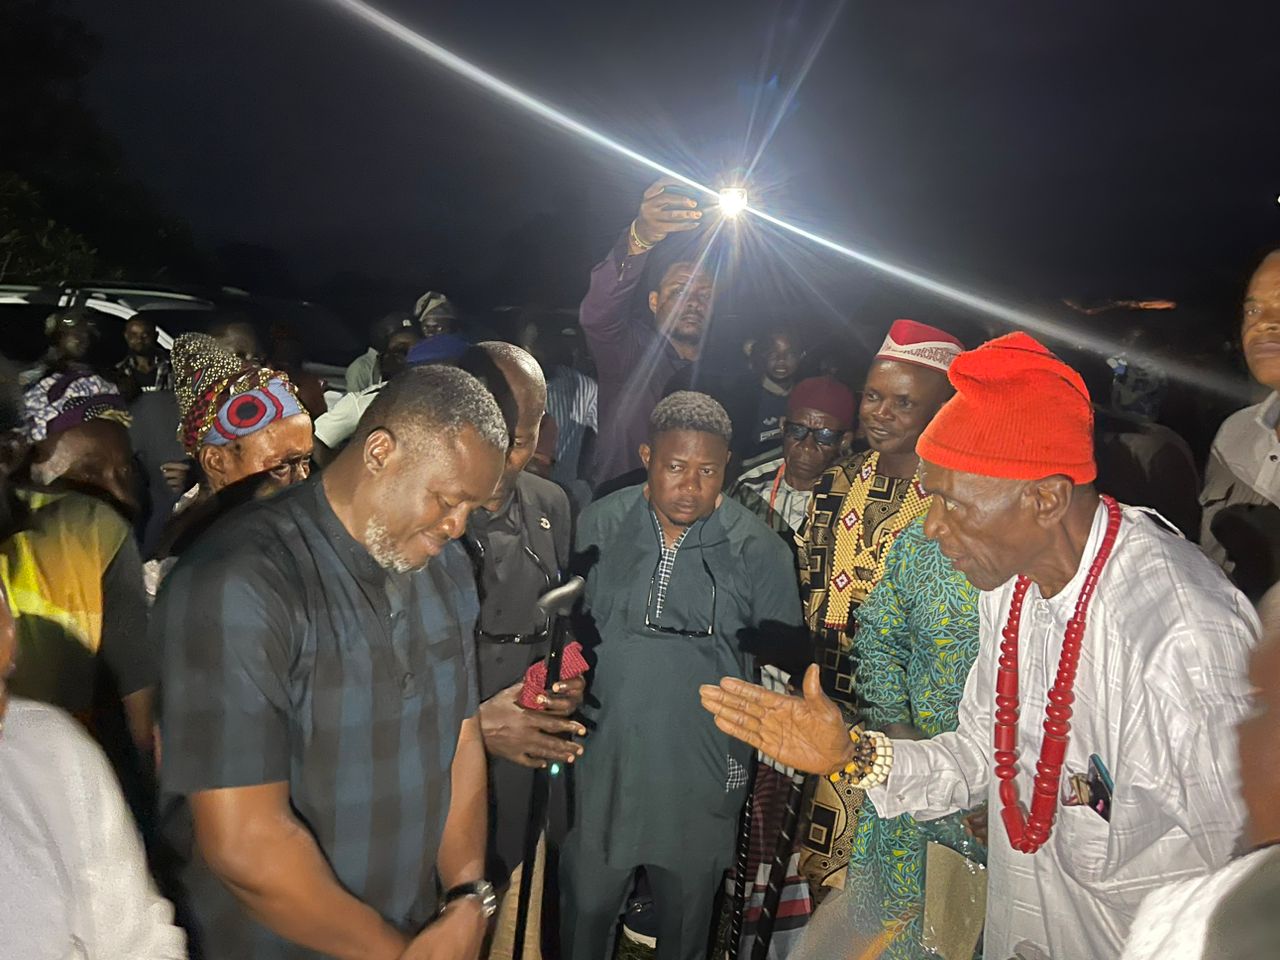 Front: Nton Bassey Nsan, Clan Head of Nde (Right), conferring Chieftaincy title "Nton Aseh Amfam" to Rt. Hon. Elvert Ayambem, Speaker of the Cross River State House of Assembly (Left)